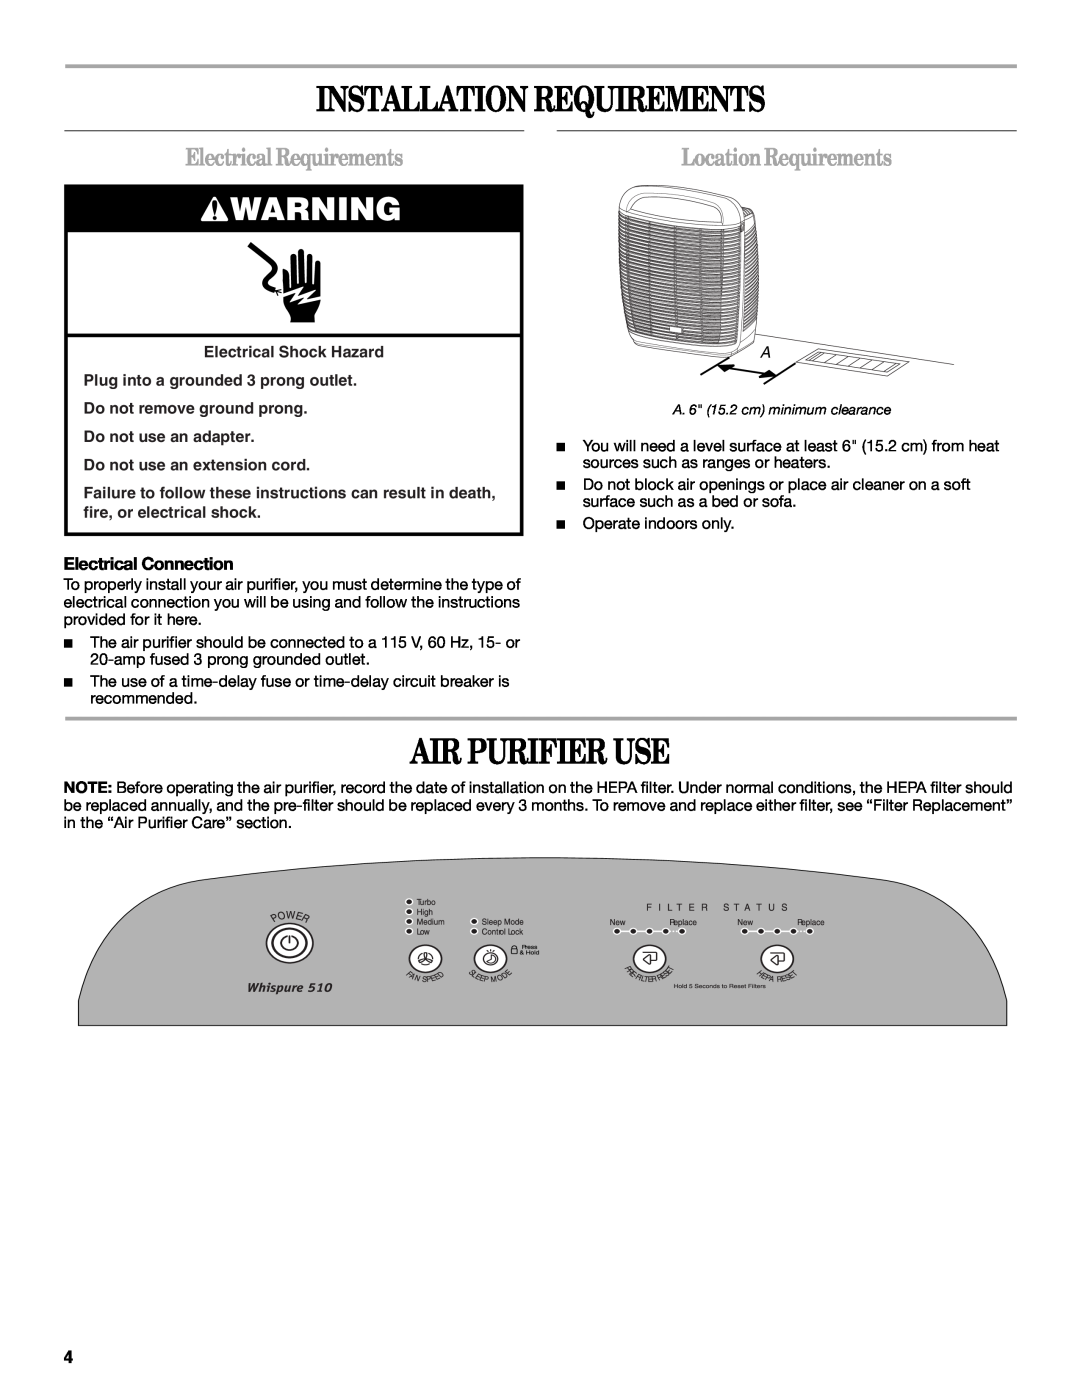 Whirlpool WP-AP510 manual Installation Requirements, Air Purifier Use, Electrical Requirements, LocationRequirements 